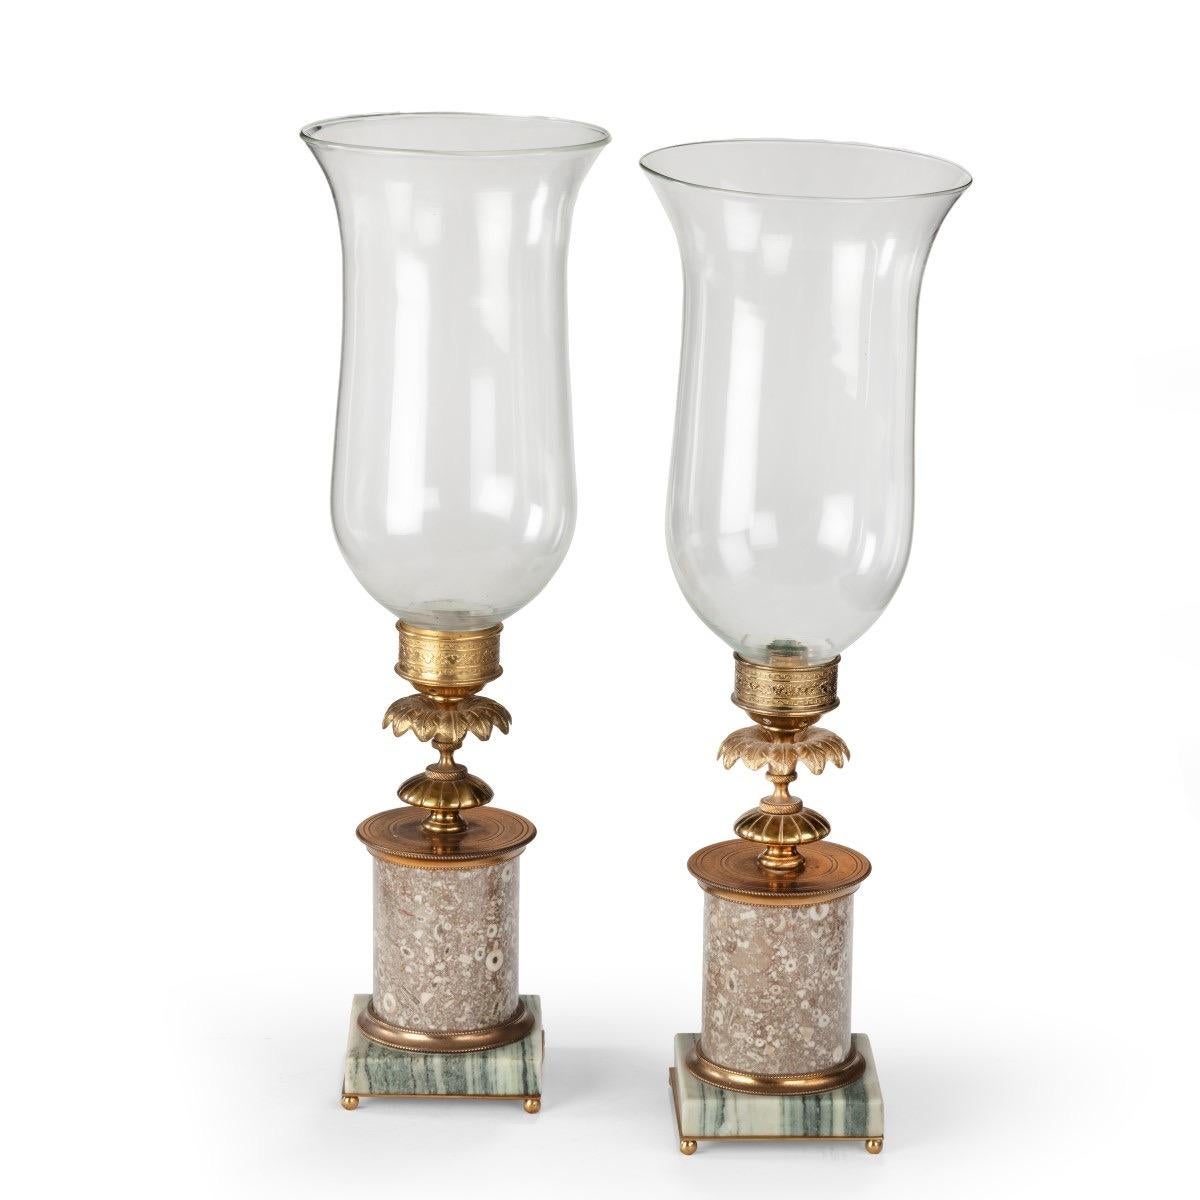 A pair of decorative storm lamps, each with a candle holder enclosed in a clear glass shade set on a turned gilt-brass support with a collar of petals and a cylindrical marble column, the rectangular base of striped marble.  English, early 19th